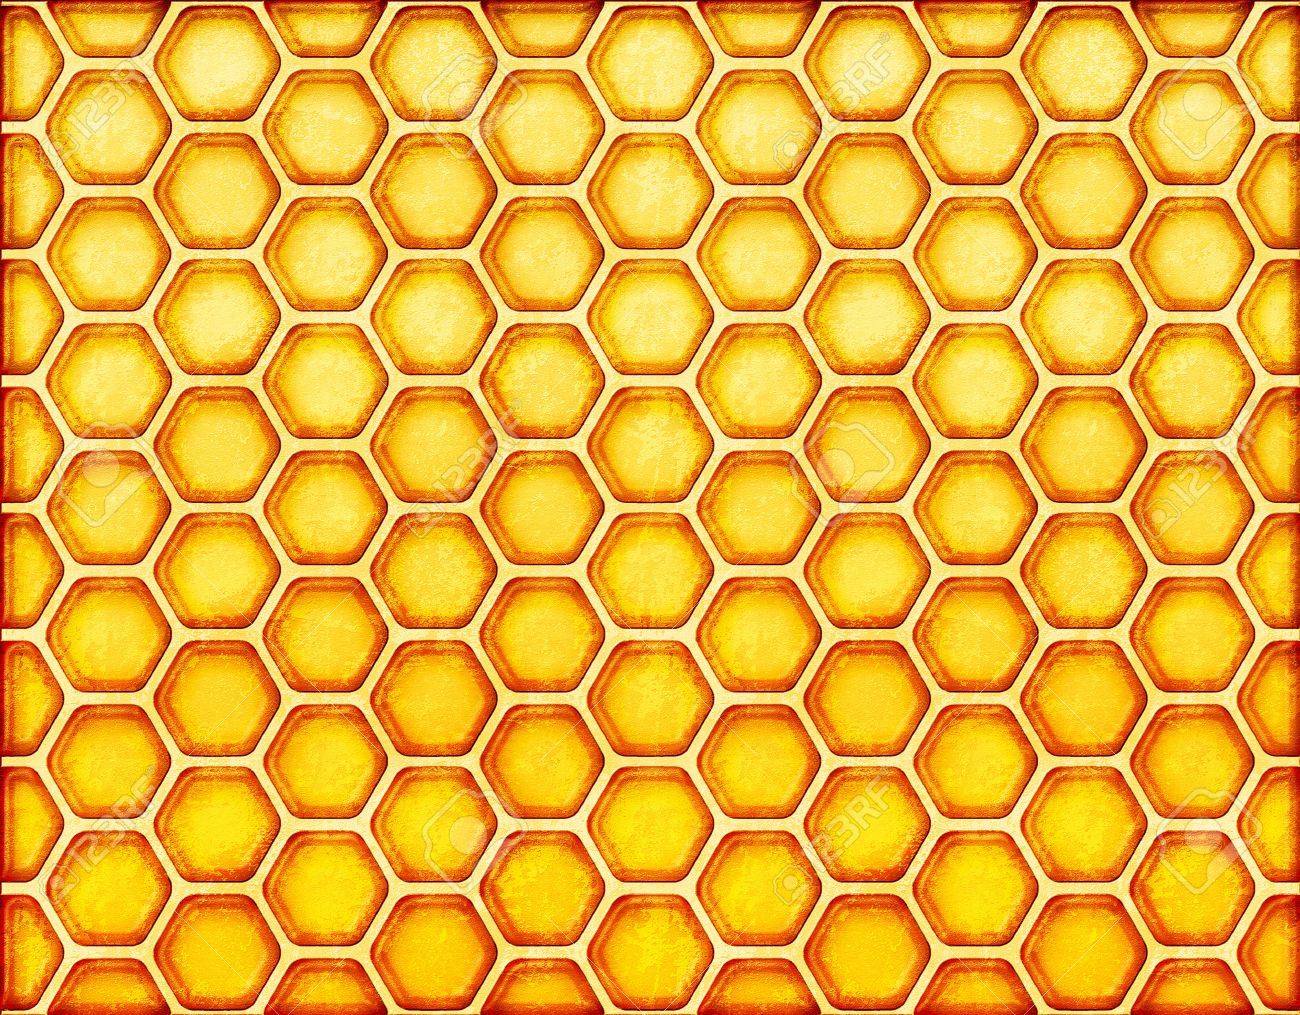 Amazing Honeycomb Pictures & Backgrounds